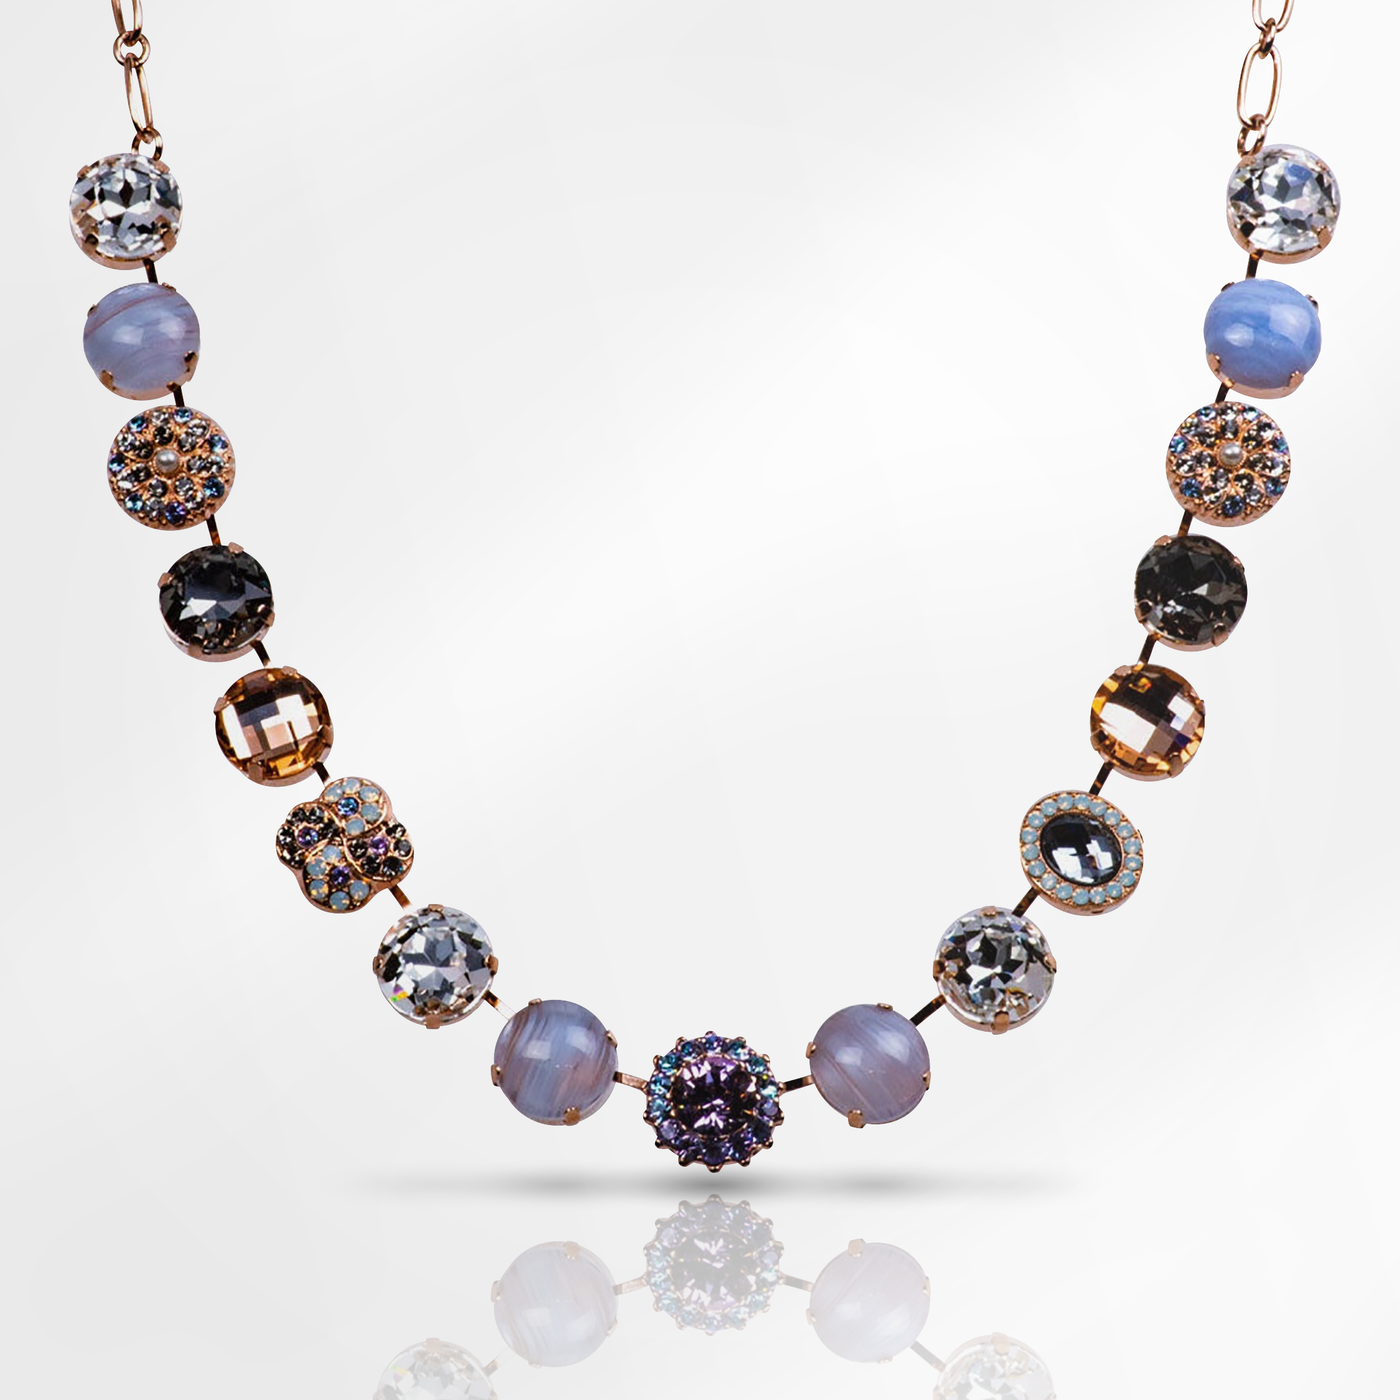 Extra Luxurious Cluster "Ice Queen" Necklace